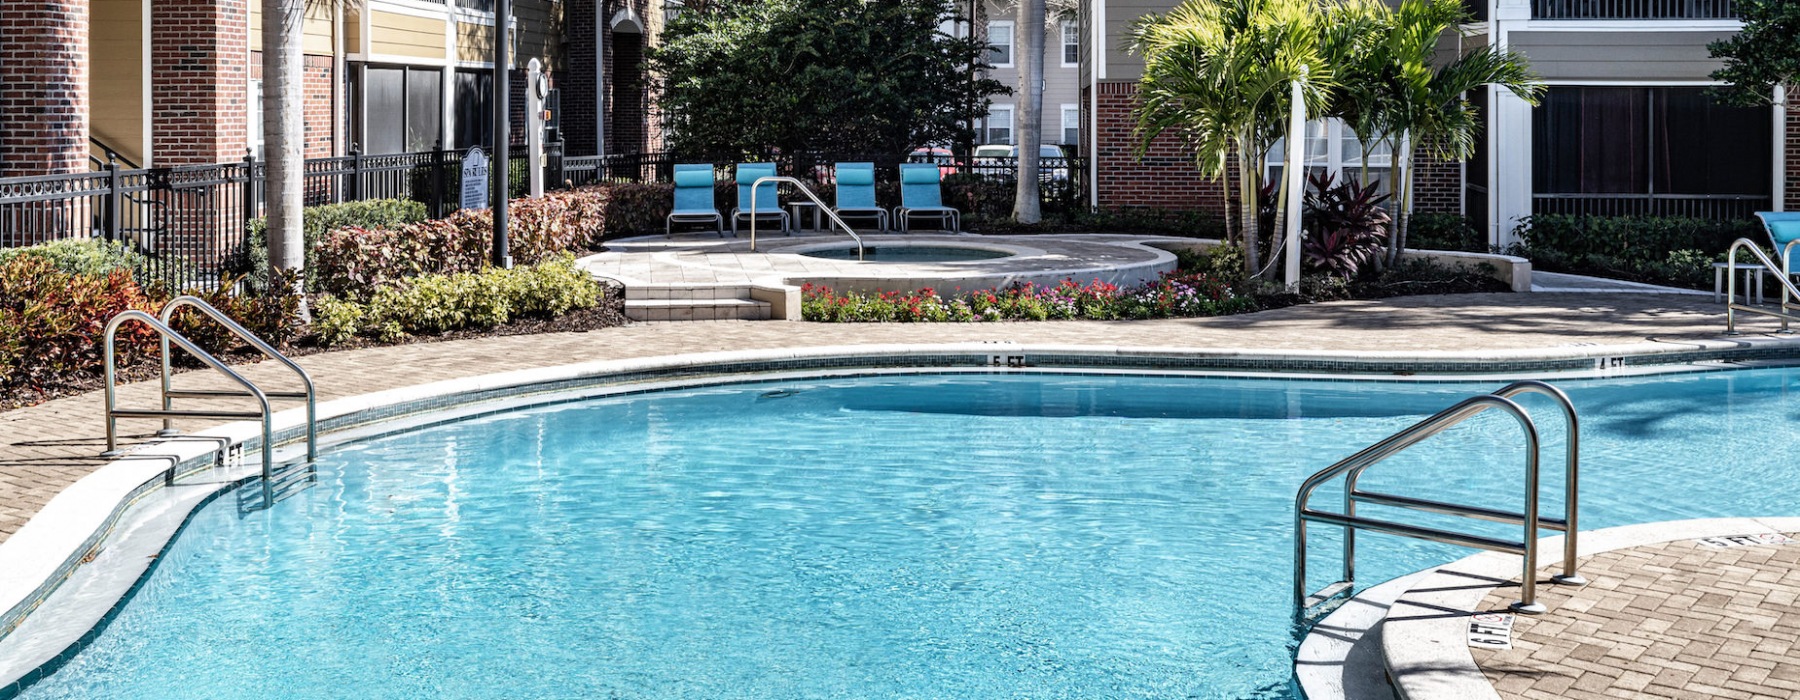 Community Pool With Poolside Cabanas At Cumberland Park Apartments In Orlando, FL